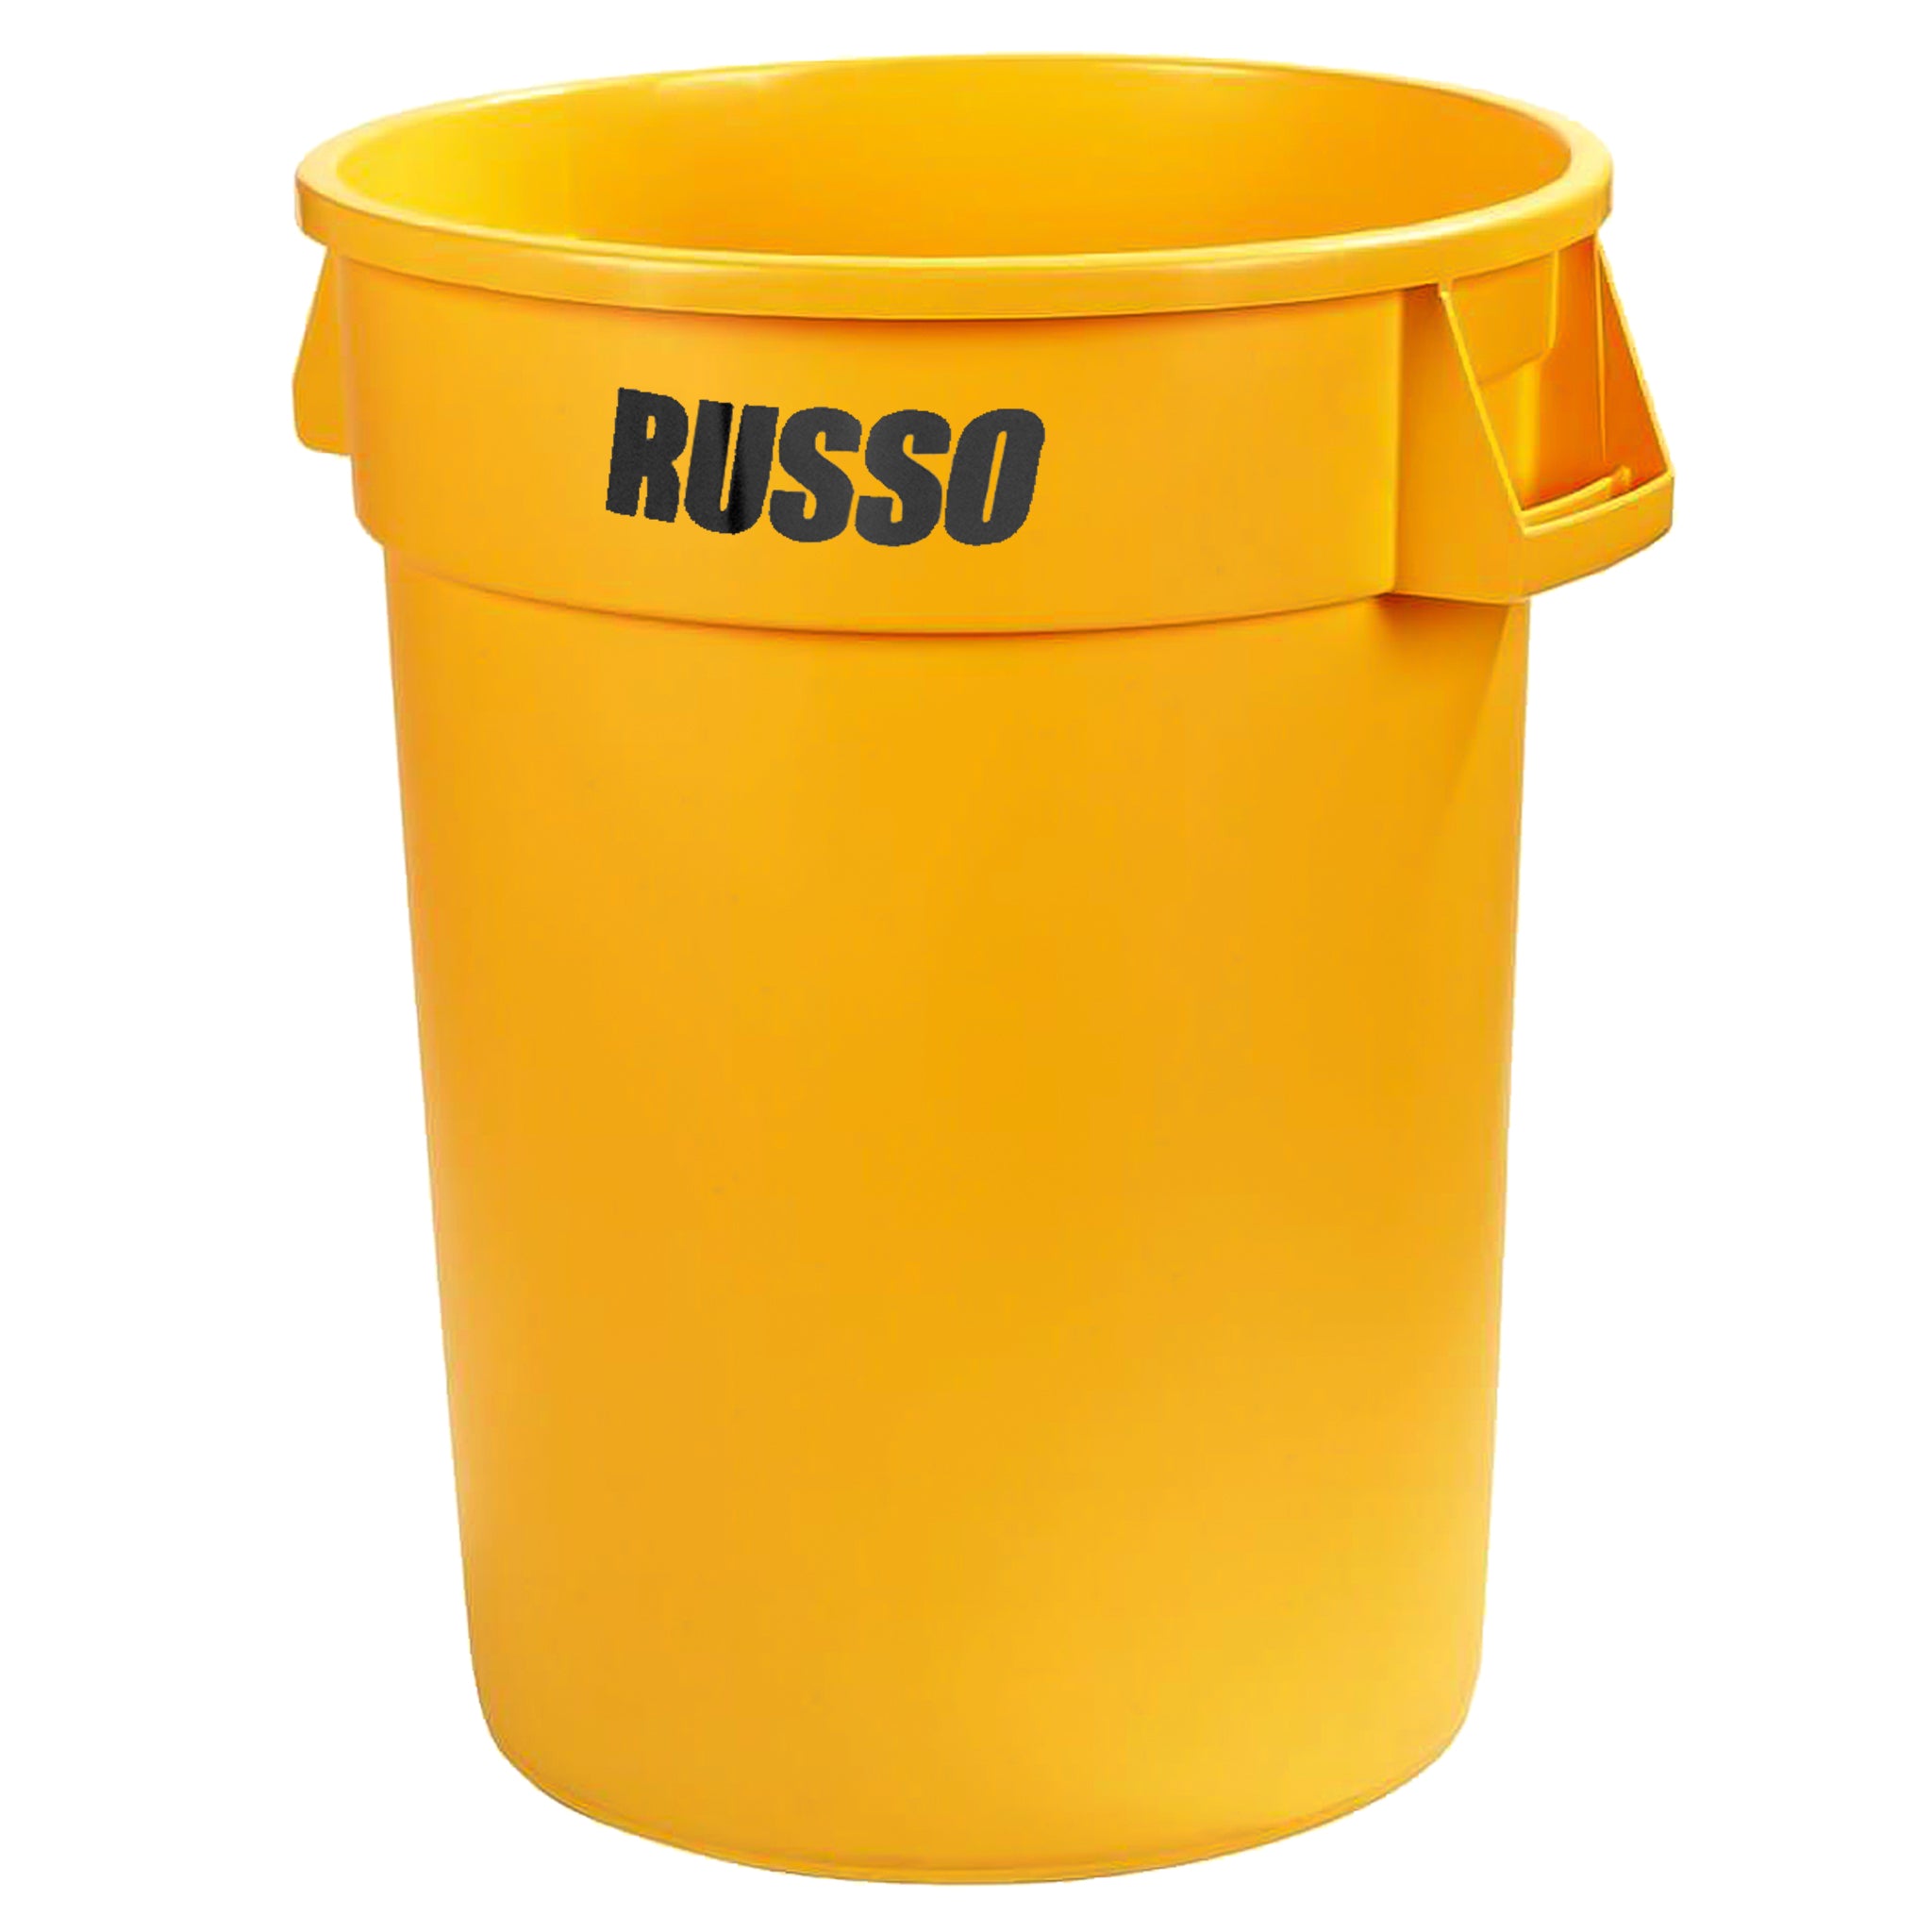 RUSSO Glow Can Container 32 Gallon – Yellow